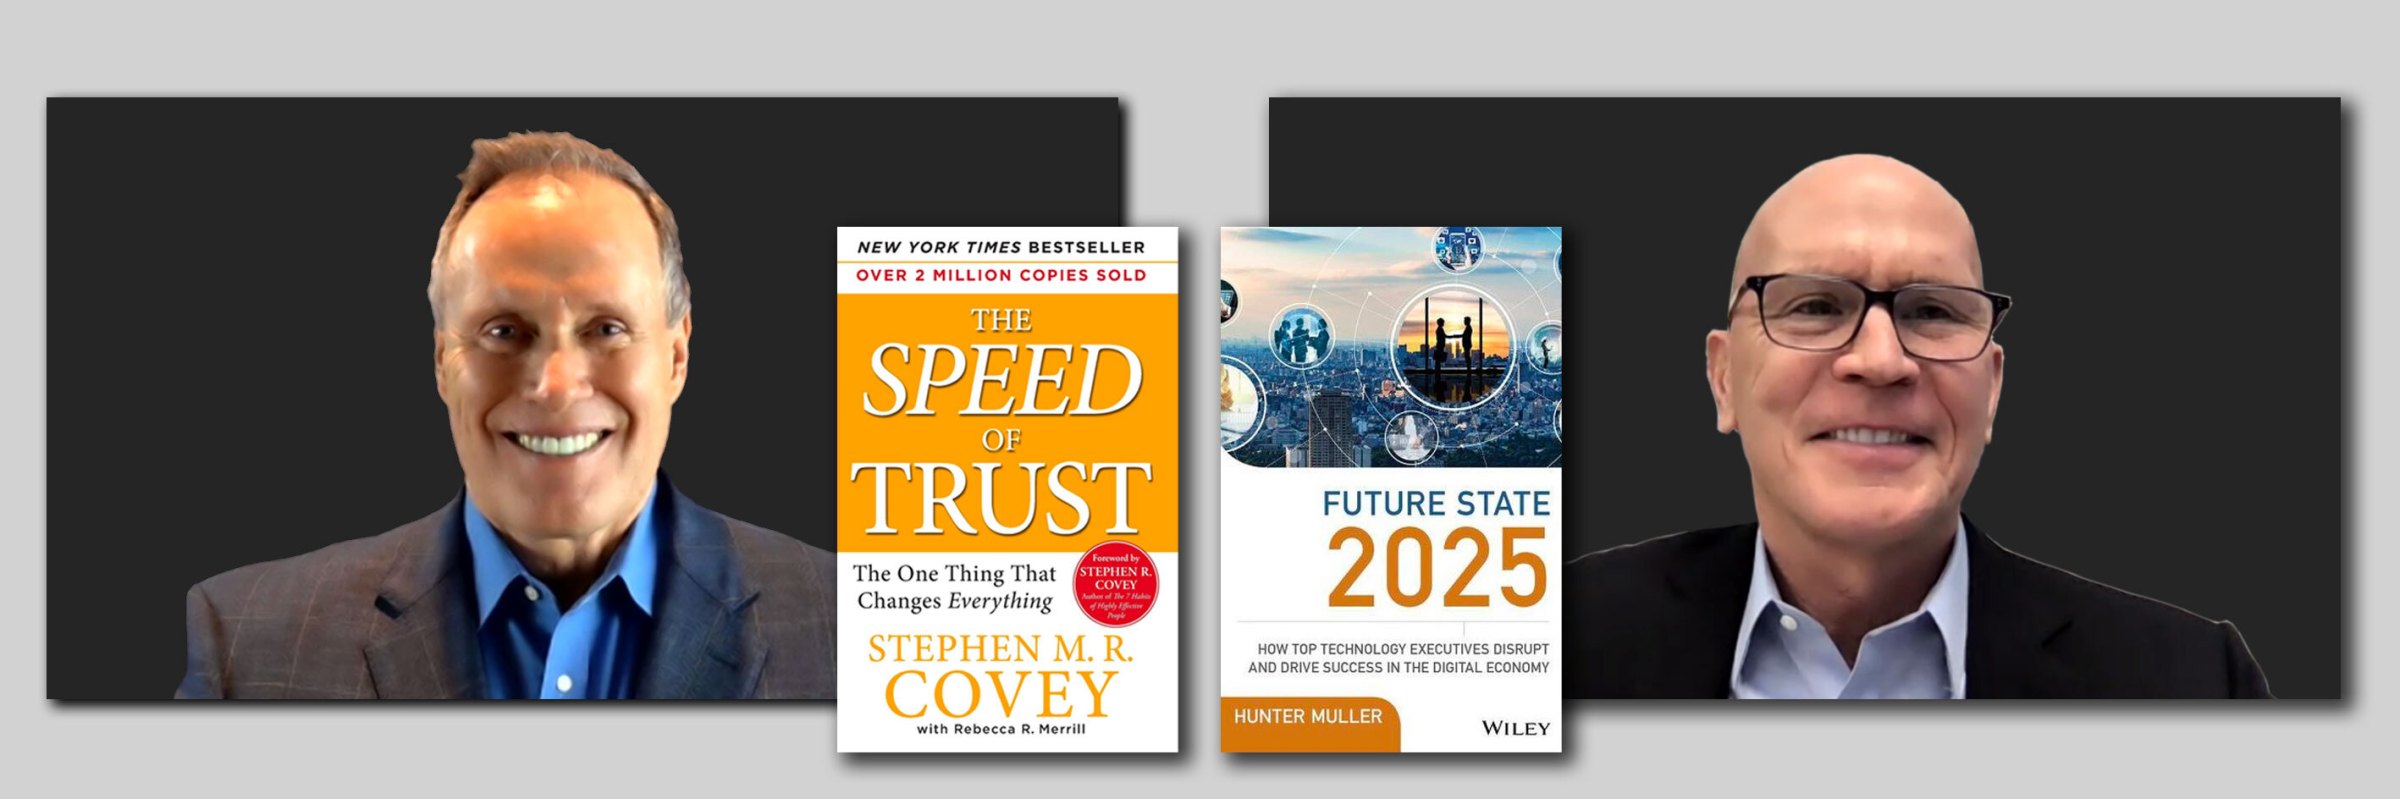 CIO Leadership: Bestselling Author Stephen M.R. Covey will Discuss the Criticality and Business Benefits of the Speed of Trust at HMG Strategy’s Upcoming CIO & CISO Executive Leadership Summits